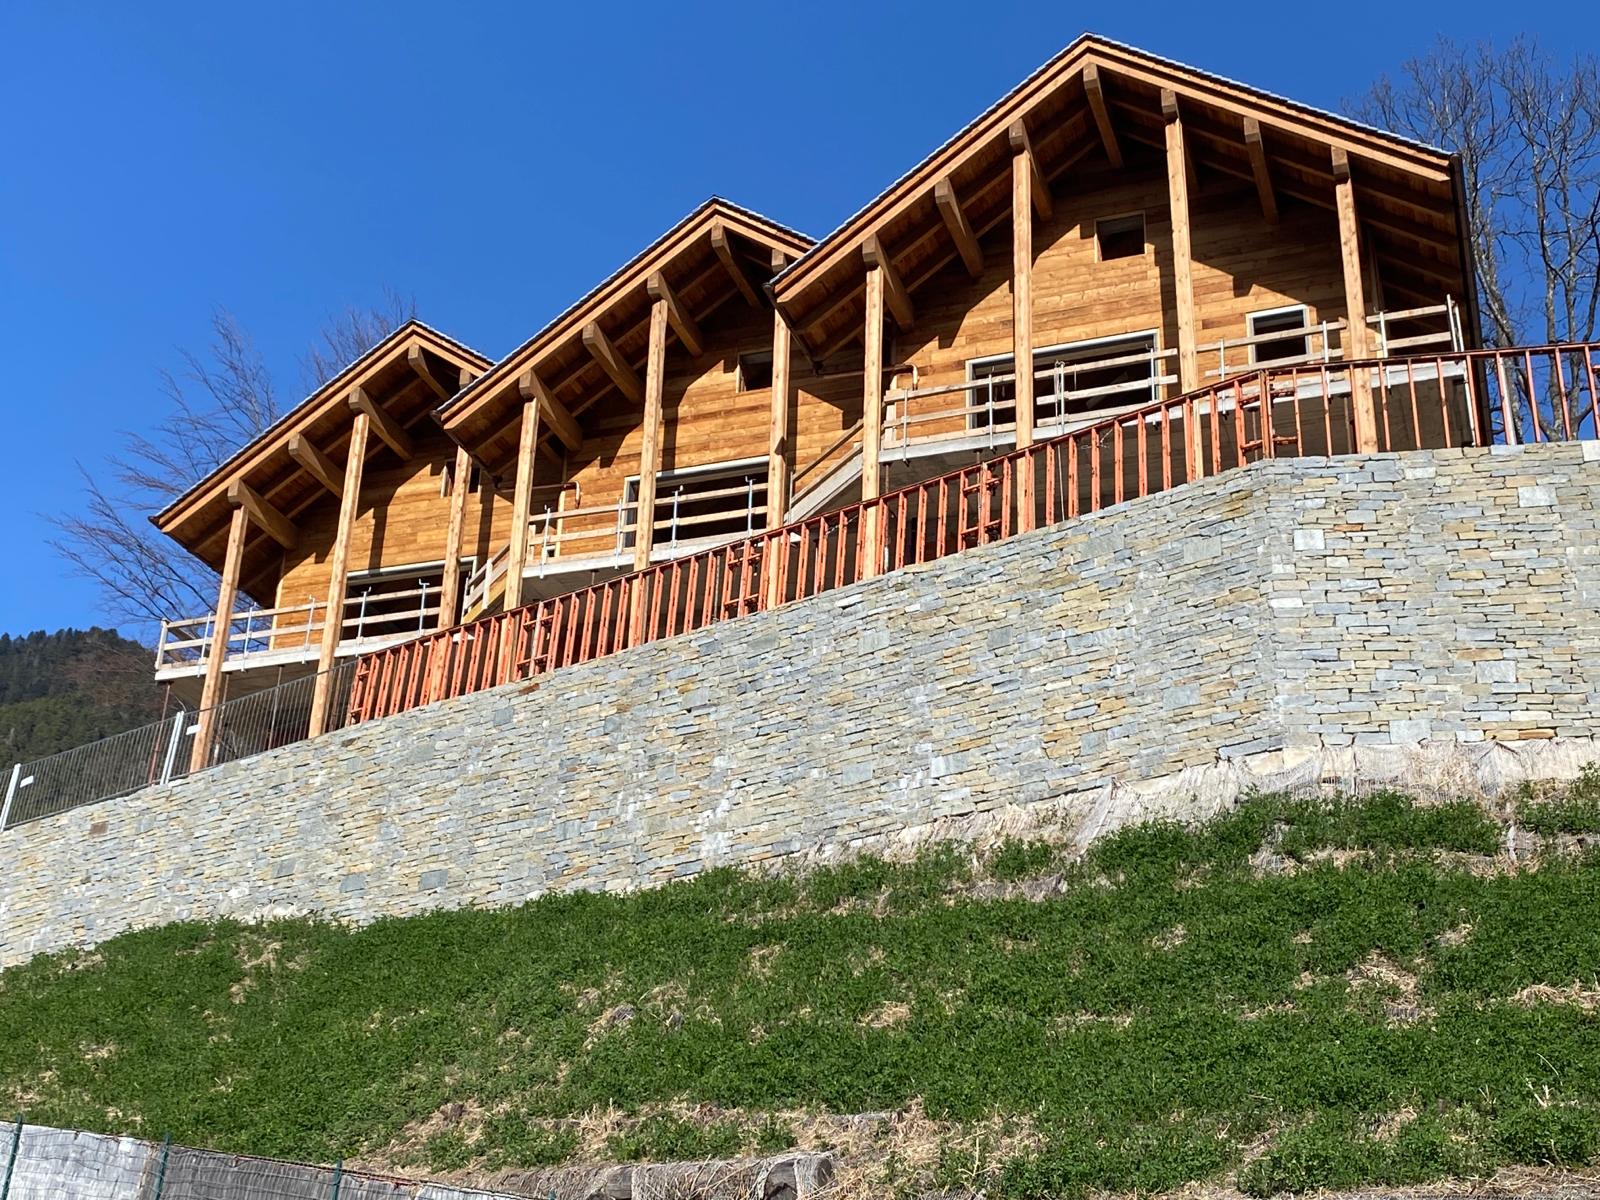 CHALET IN POSIZIONE UNICA-PANORAMICA